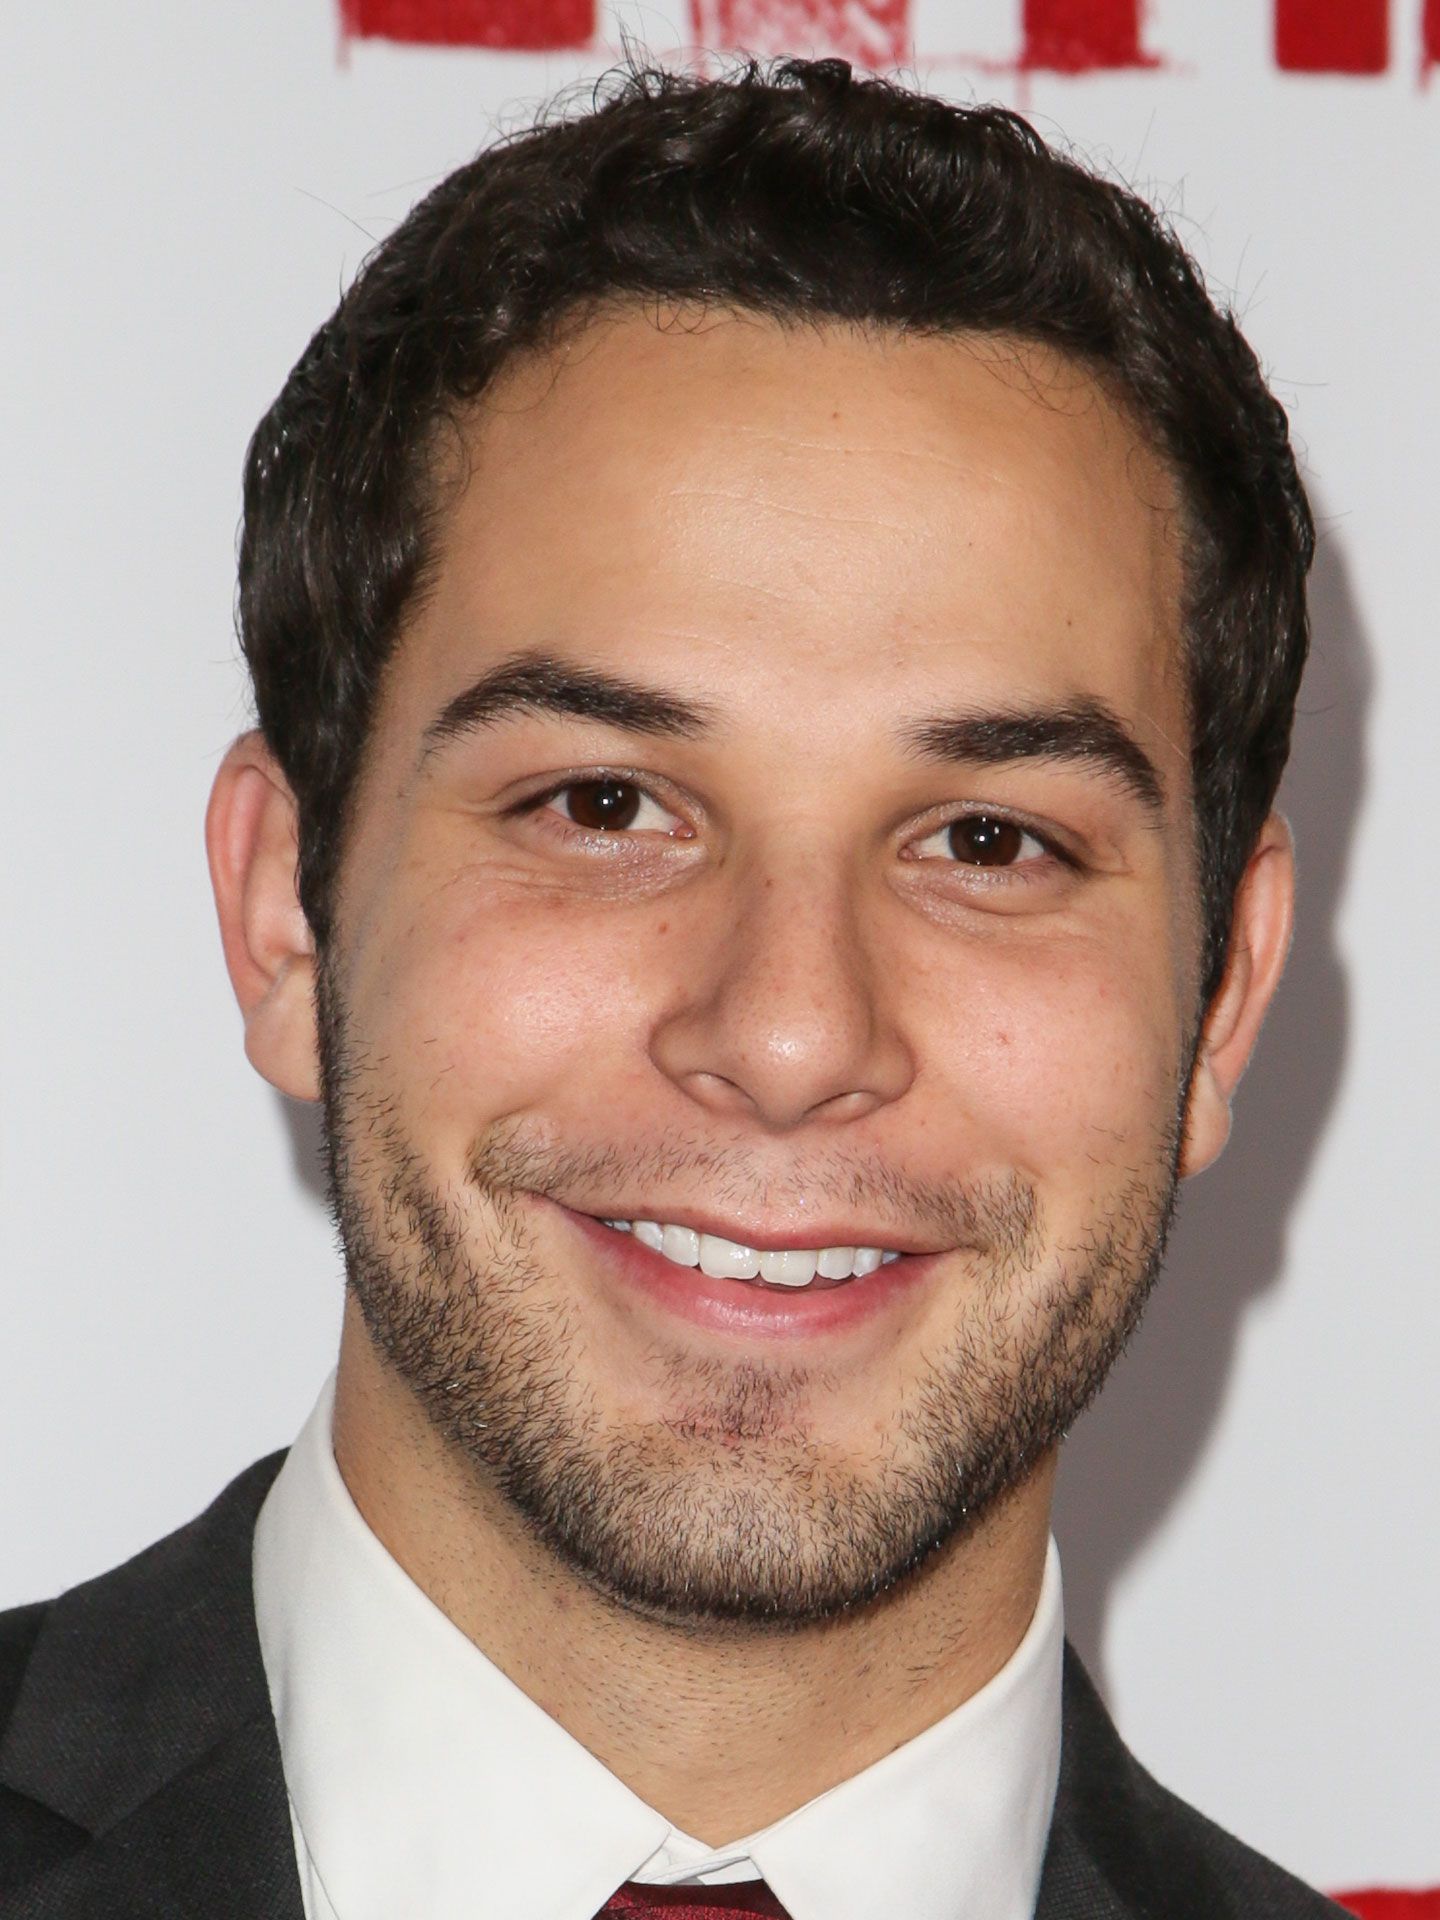 Unlock The Secrets Of Skylar Astin: A Comprehensive Look At The Rising Star's Career And Personal Life